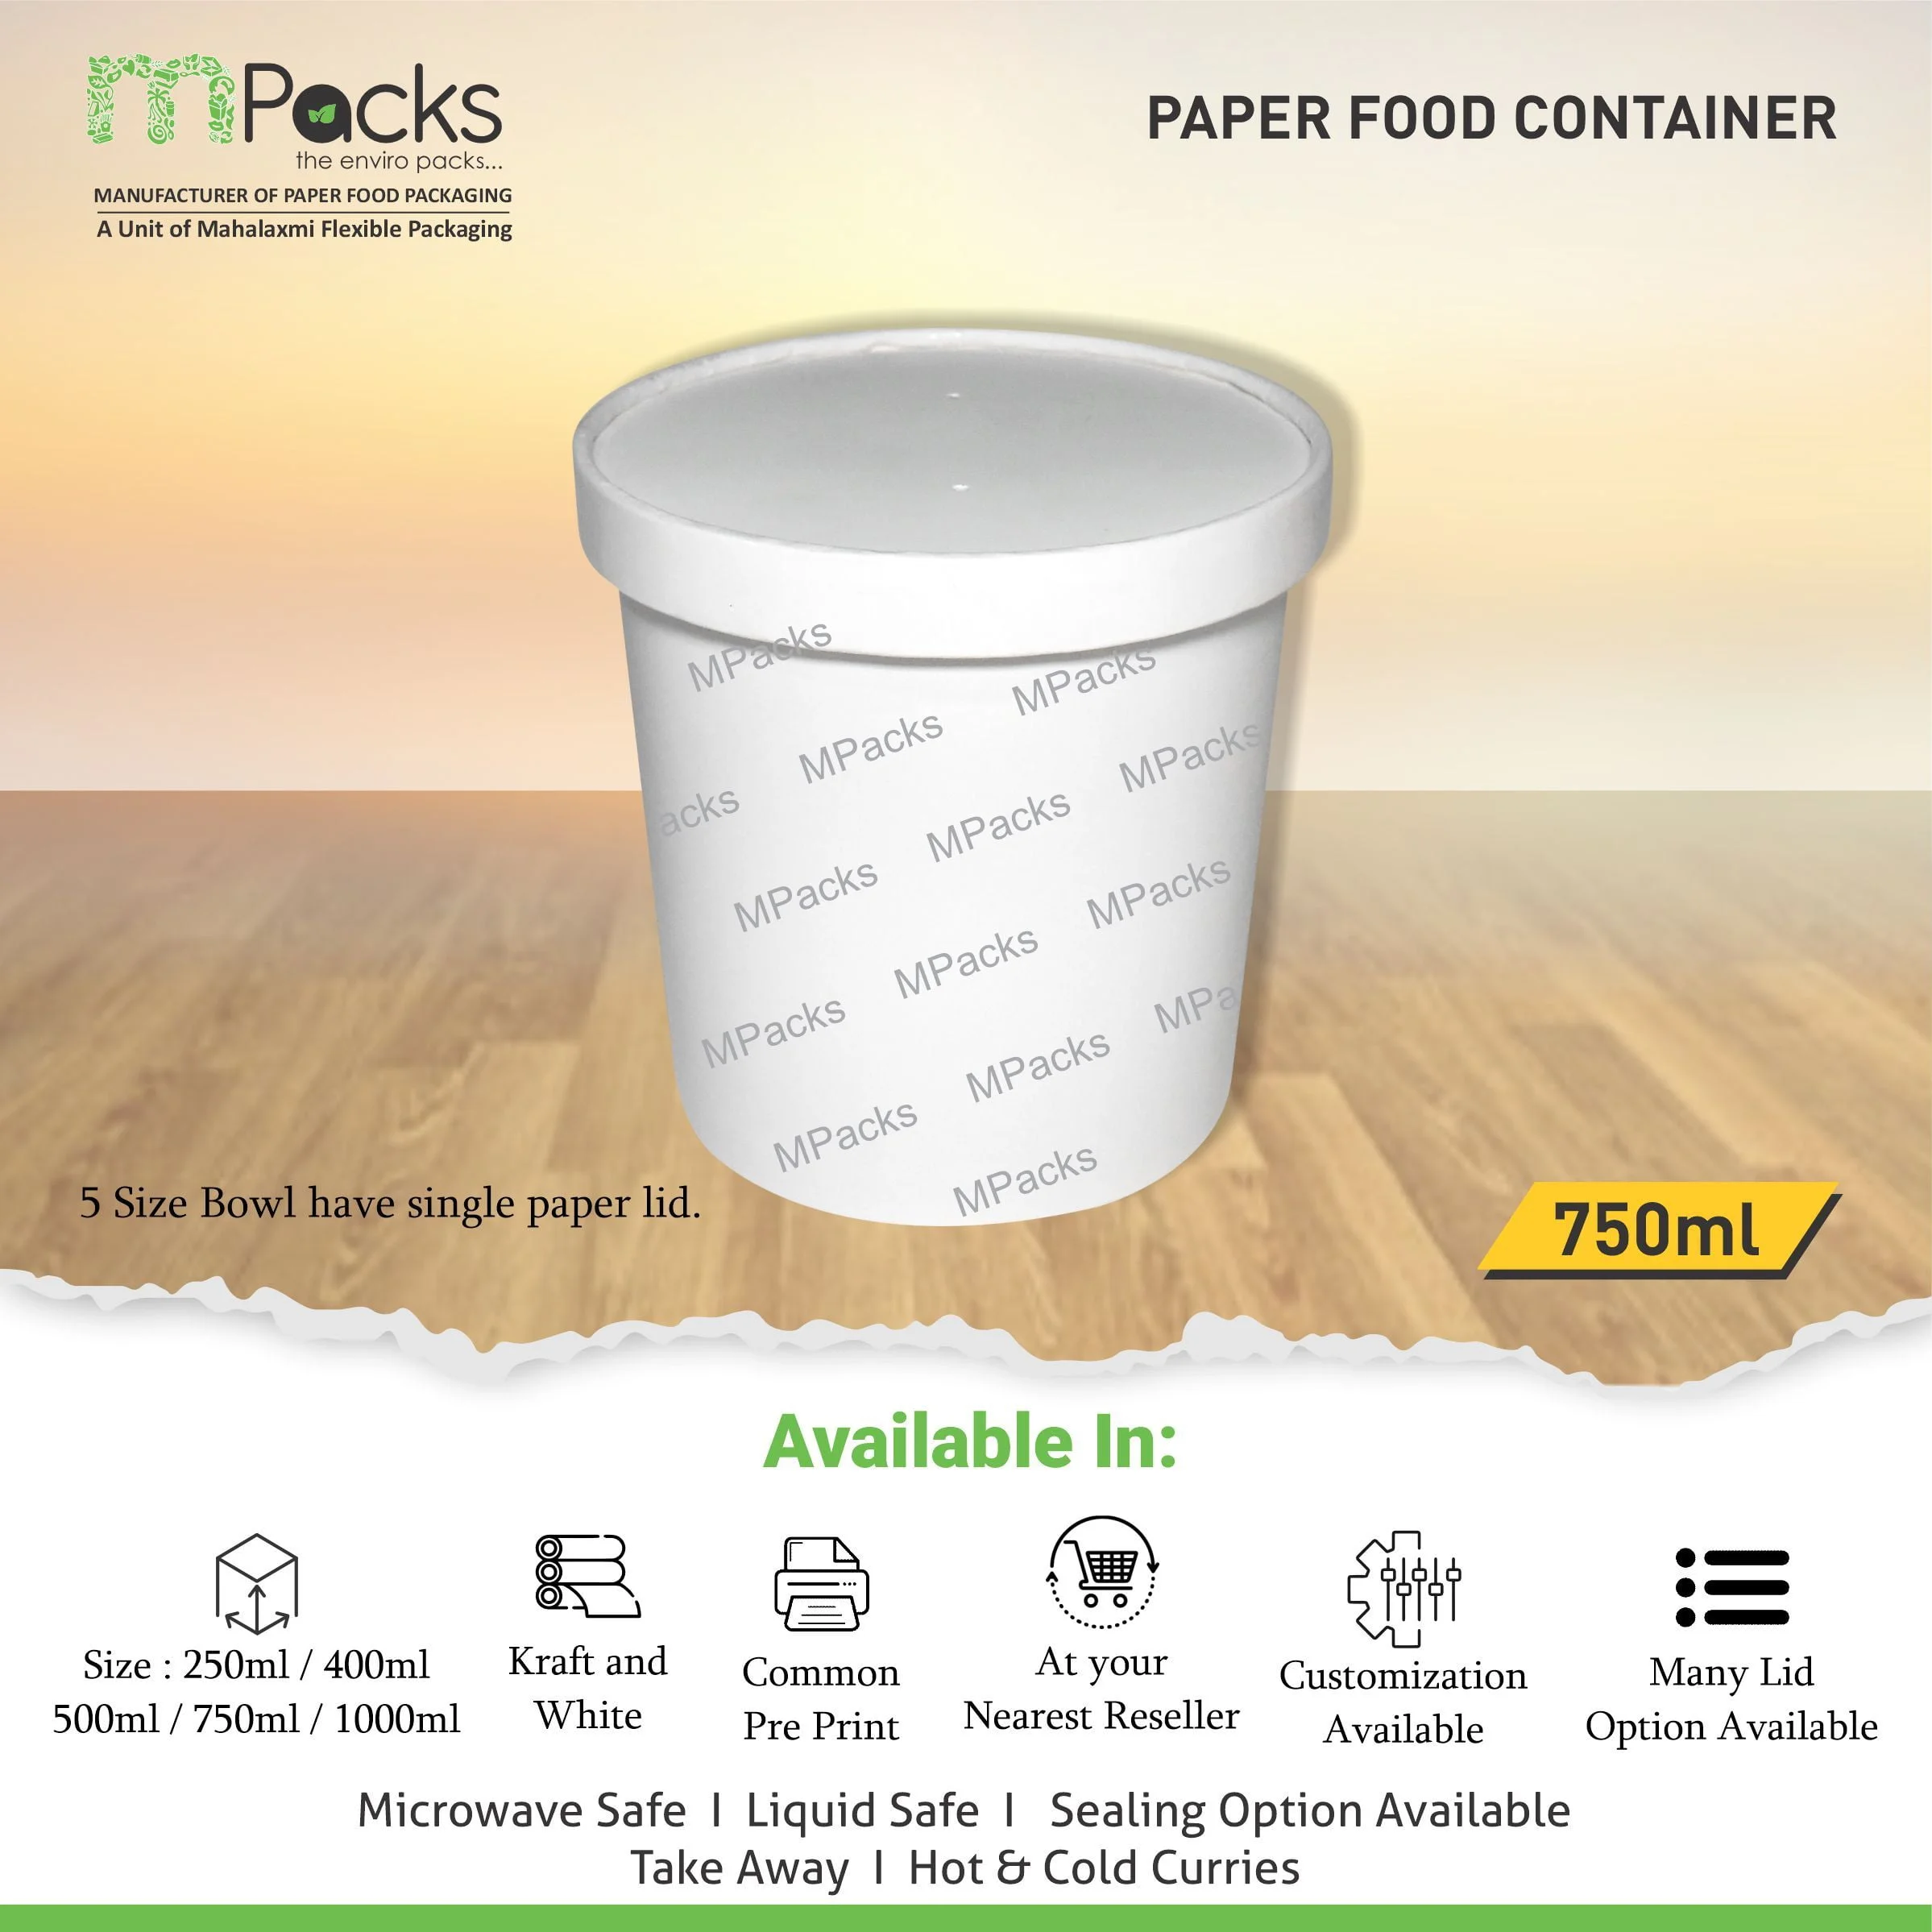 Paper Food Container, Soup Bowl - White Paper with Lid -750ml, 24oz Size